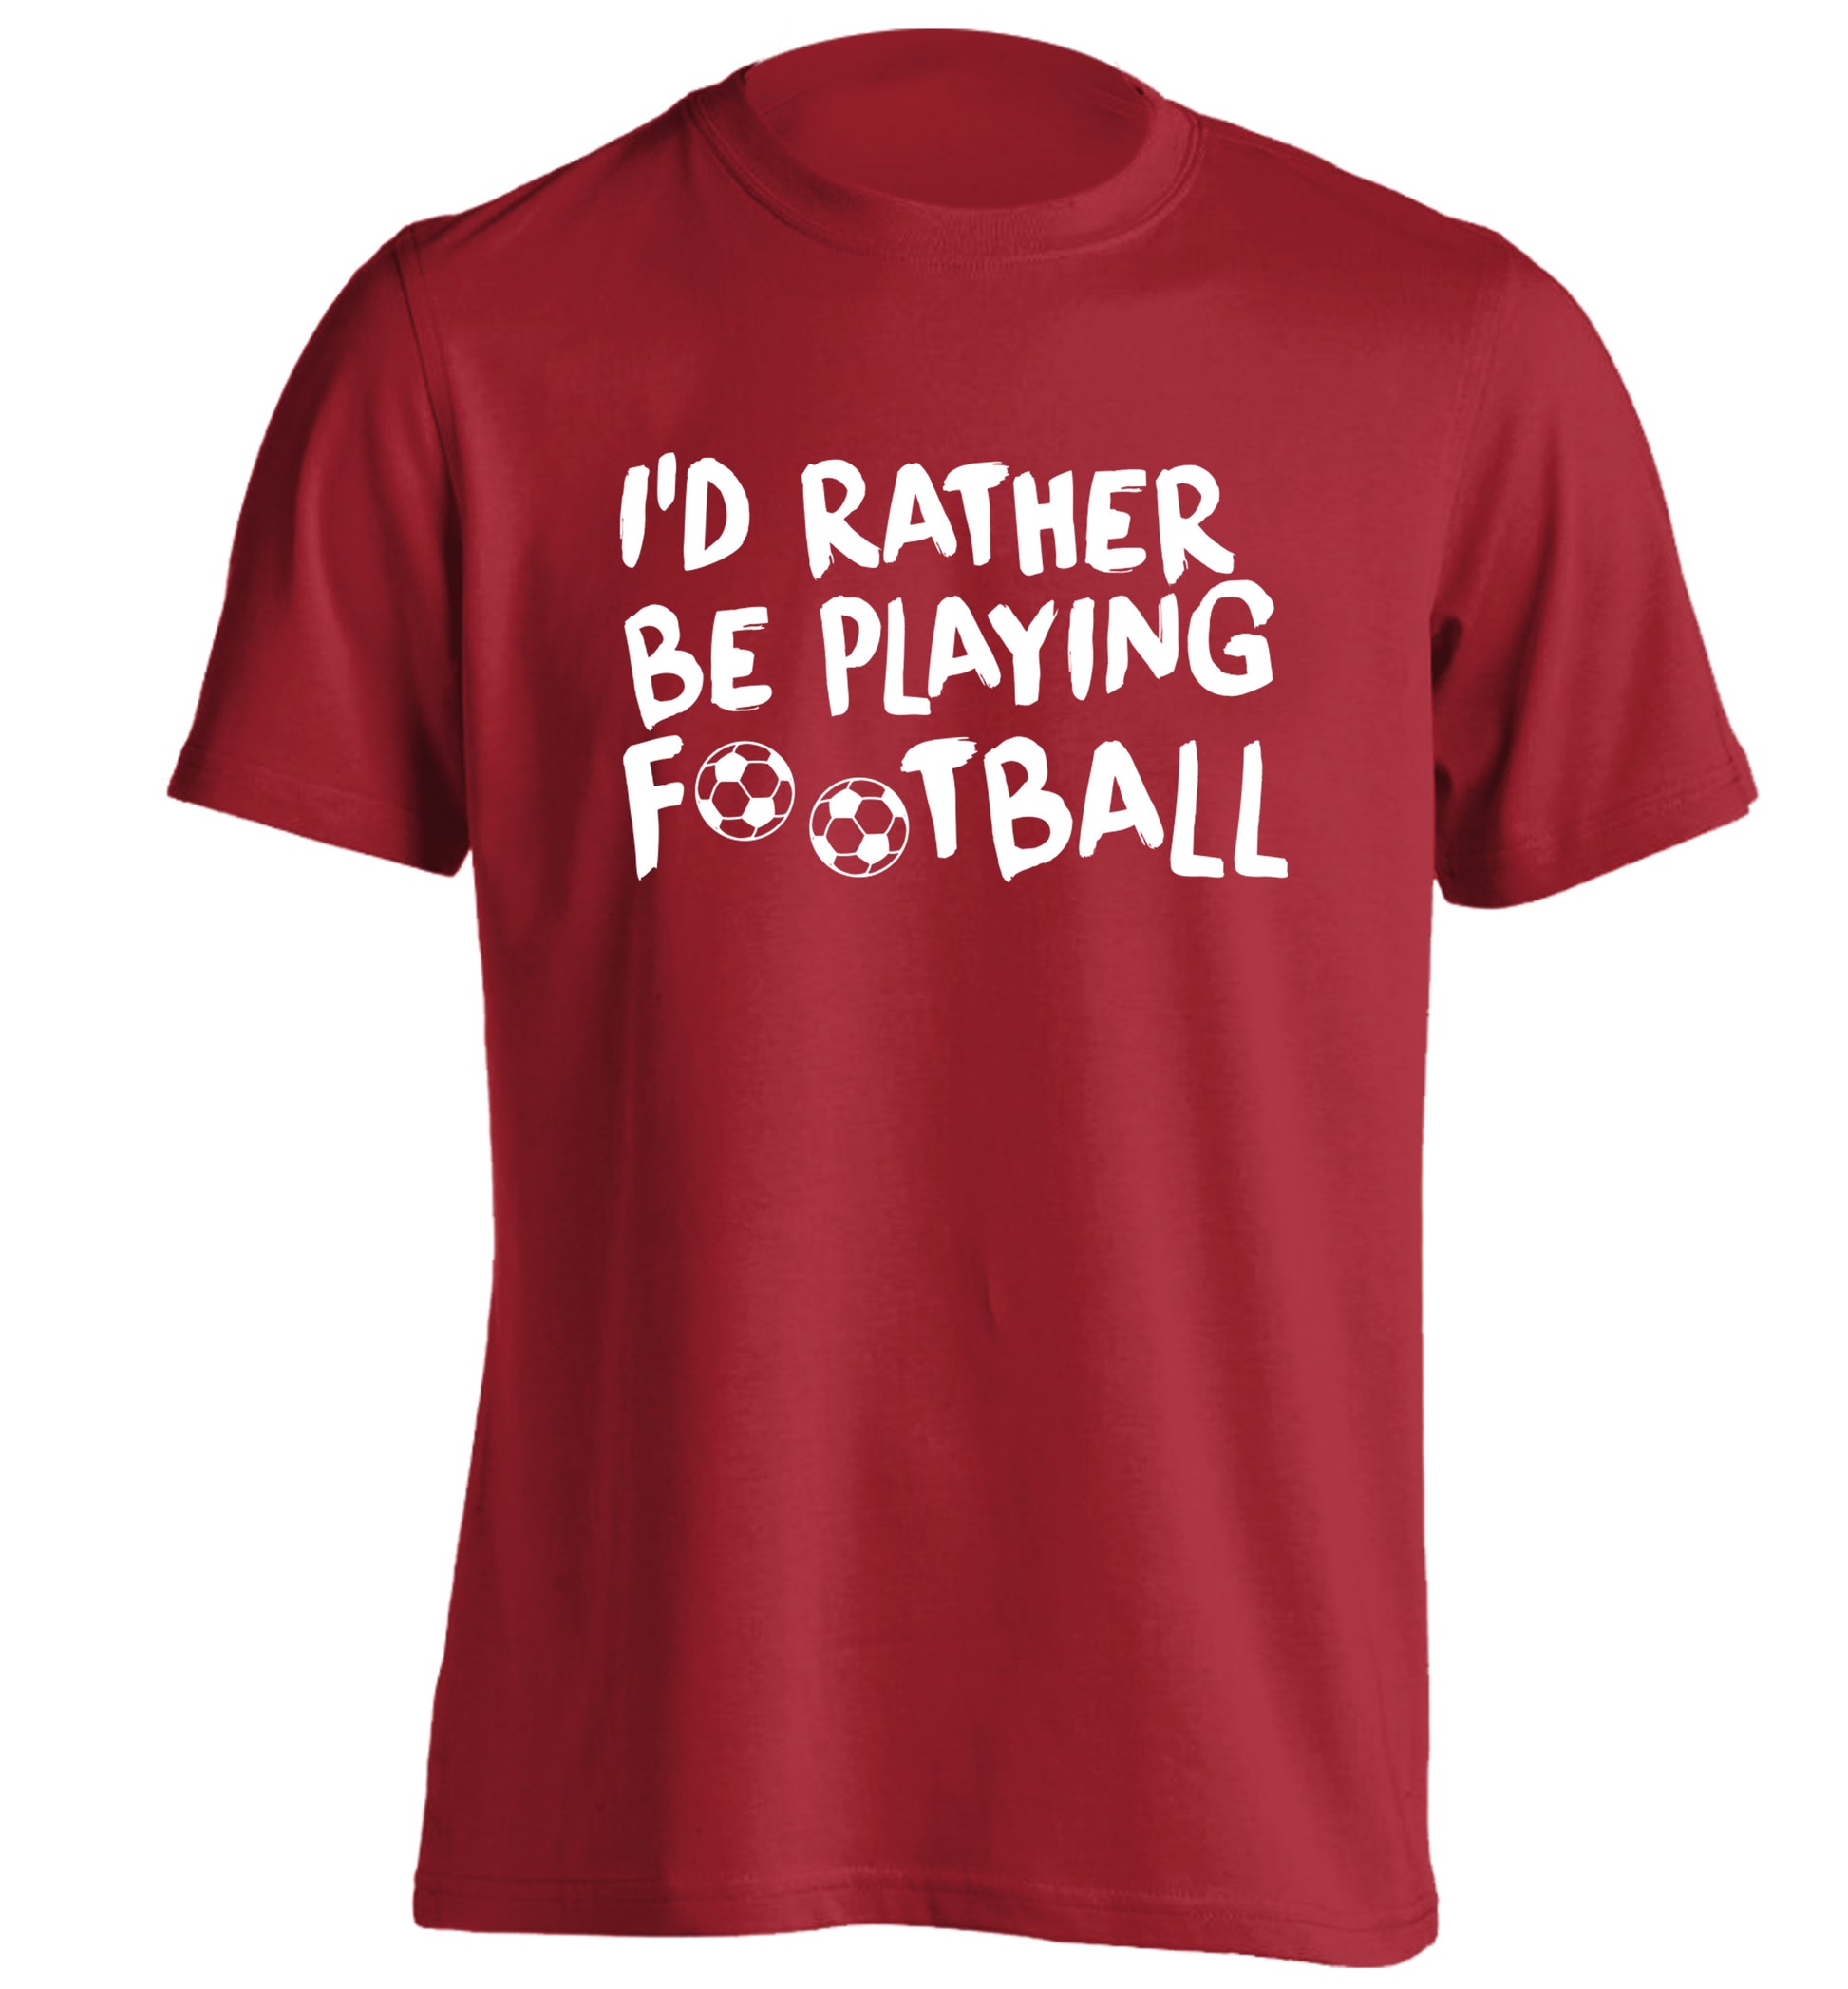 I'd rather be playing football adults unisexred Tshirt 2XL